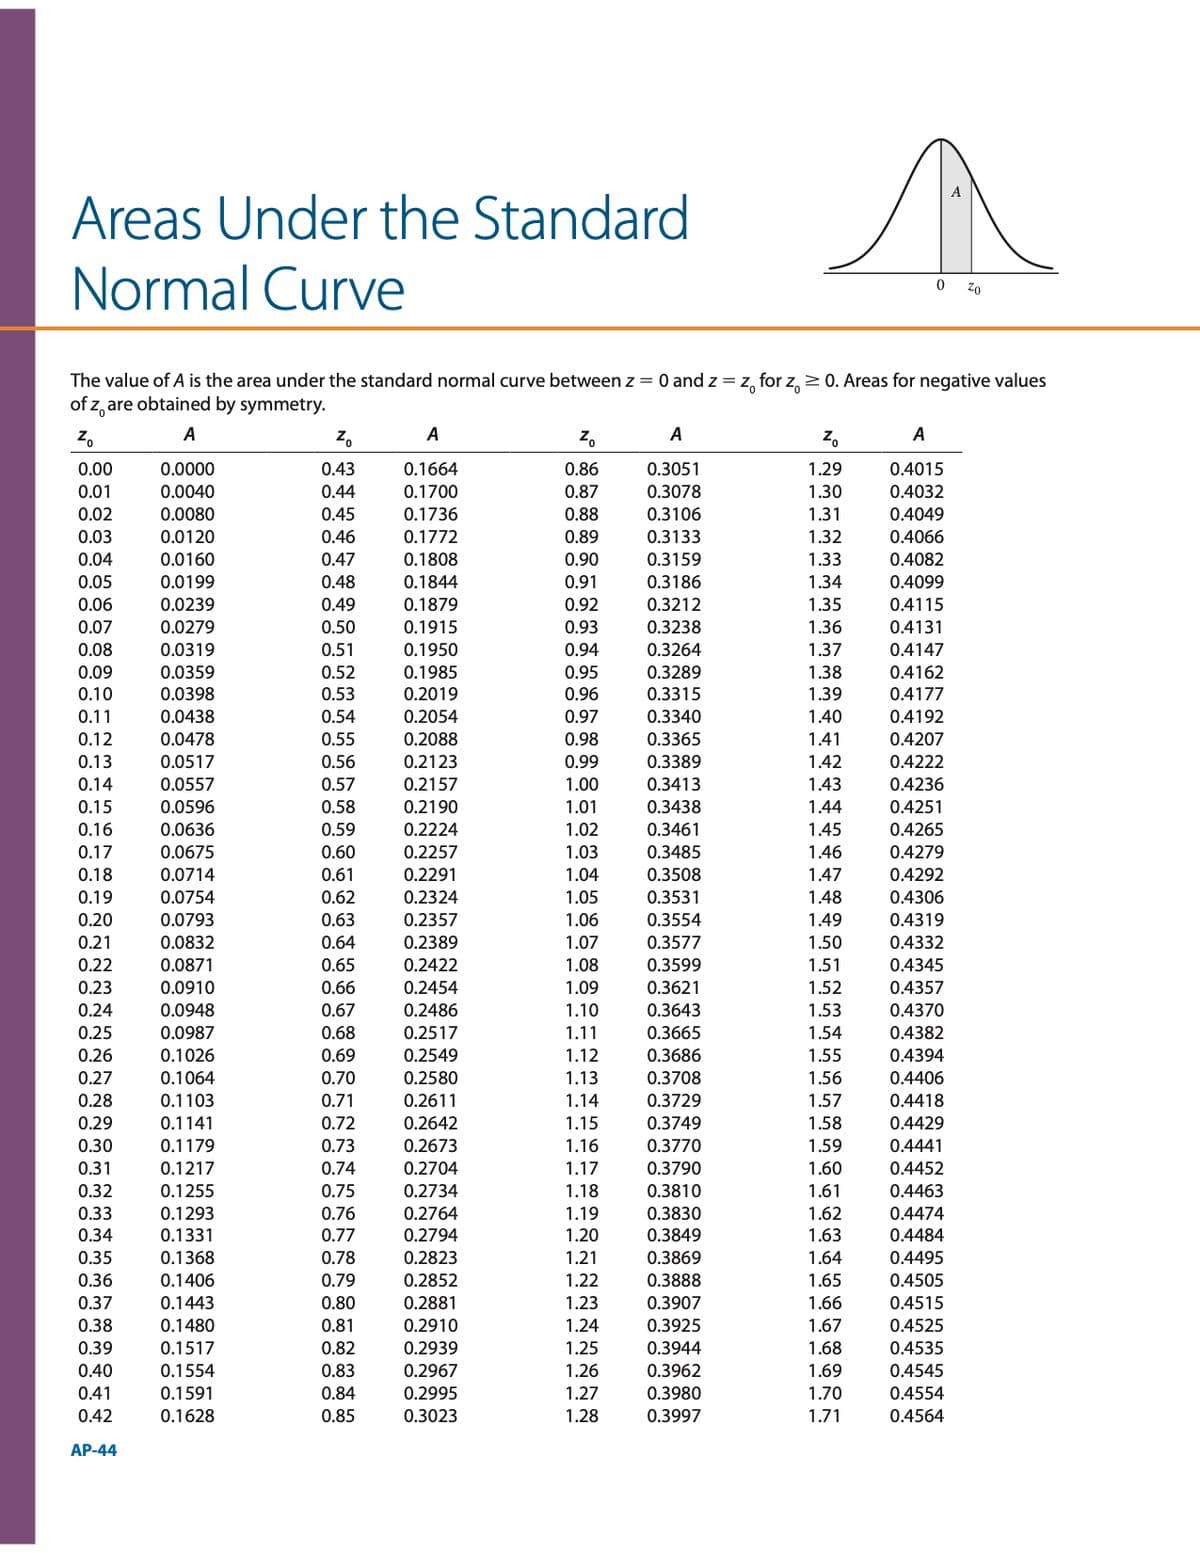 Areas Under the Standard
Normal Curve
0 Z0
The value of A is the area under the standard normal curve between z = 0 and z = z, for z, 2 0. Areas for negative values
of z, are obtained by symmetry.
z.
А
Z,
A
Z.
A
Z.
A
0.00
0.0000
0.43
0.1664
0.86
0.3051
1.29
0.4015
0.01
0.0040
0.44
0.1700
0.87
0.3078
1.30
0.4032
0.02
0.03
0.04
0.88
0.89
0.0080
0.45
0.1736
0.3106
1.31
0.4049
0.1772
0.1808
0.0120
0.46
0.3133
1.32
0.4066
0.0160
0.47
0.90
0.3159
1.33
0.4082
0.05
0.0199
0.48
0.1844
0.91
0.3186
1.34
0.4099
0.06
0.0239
0.49
0.1879
0.92
0.3212
1.35
0.4115
0.07
0.0279
0.50
0.1915
0.93
0.3238
1.36
0.4131
0.08
0.0319
0.51
0.1950
0.94
0.3264
1.37
0.4147
0.09
0.0359
0.52
0.1985
0.95
0.3289
1.38
0.4162
0.0398
0.0438
0.10
0.53
0.2019
0.96
0.3315
1.39
0.4177
0.11
0.54
0.2054
0.97
0.3340
1.40
0.4192
0.98
0.3365
0.4207
0.4222
0.12
0.0478
0.55
0.2088
1.41
0.13
0.0517
0.56
0.2123
0.99
0.3389
1.42
0.14
0.0557
0.57
0.2157
1.00
0.3413
1.43
0.4236
0.15
0.0596
0.58
0.2190
1.01
0.3438
1.44
0.4251
0.0636
0.0675
0.16
0.59
0.2224
1.02
0.3461
1.45
0.4265
1.46
1.47
1.48
1.49
0.17
0.60
0.2257
1.03
0.3485
0.4279
0.61
0.62
0.63
0.18
0.0714
0.2291
1.04
0.3508
0.4292
0.19
0.0754
0.2324
1.05
0.3531
0.4306
0.20
0.0793
0.2357
1.06
0.3554
0.4319
1.07
1.08
0.21
0.0832
0.64
0.2389
0.3577
1.50
0.4332
0.22
0.0871
0.65
0.2422
0.3599
1.51
0.4345
0.3621
1.52
1.53
0.23
0.0910
0.66
0.2454
1.09
0.4357
0.24
0.0948
0.67
0.2486
1.10
0.3643
0.4370
0.25
0.0987
0.68
0.2517
1.11
0.3665
1.54
0.4382
0.26
0.1026
0.69
0.2549
1.12
0.3686
1.55
0.4394
0.3708
1.56
1.57
0.27
0.1064
0.70
0.2580
1.13
0.4406
0.28
0.1103
0.71
0.2611
1.14
0.3729
0.4418
0.29
0.1141
0.72
0.2642
1.15
0.3749
1.58
0.4429
0.1179
0.1217
0.1255
0.1293
0.2673
1.59
0.4441
0.4452
0.4463
0.30
0.73
1.16
0.3770
0.3790
1.60
1.61
0.31
0.74
0.2704
1.17
0.32
0.75
0.2734
1.18
0.3810
0.33
0.76
0.2764
1.19
0.3830
1.62
0.4474
0.4484
0.4495
0.4505
0.4515
0.4525
0.4535
0.4545
0.34
0.1331
0.77
0.2794
1.20
0.3849
1.63
0.35
0.1368
0.78
0.2823
1.21
0.3869
1.64
0.36
0.1406
0.79
0.2852
1.22
0.3888
1.65
0.37
0.1443
0.80
0.2881
1.23
0.3907
1.66
0.38
0.1480
0.81
0.2910
1.24
0.3925
1.67
0.39
0.1517
0.82
0.2939
1.25
0.3944
1.68
0.40
0.1554
0.83
0.2967
1.26
0.3962
1.69
0.41
0.1591
0.84
0.2995
1.27
0.3980
1.70
0.4554
0.42
0.1628
0.85
0.3023
1.28
0.3997
1.71
0.4564
АР-44
